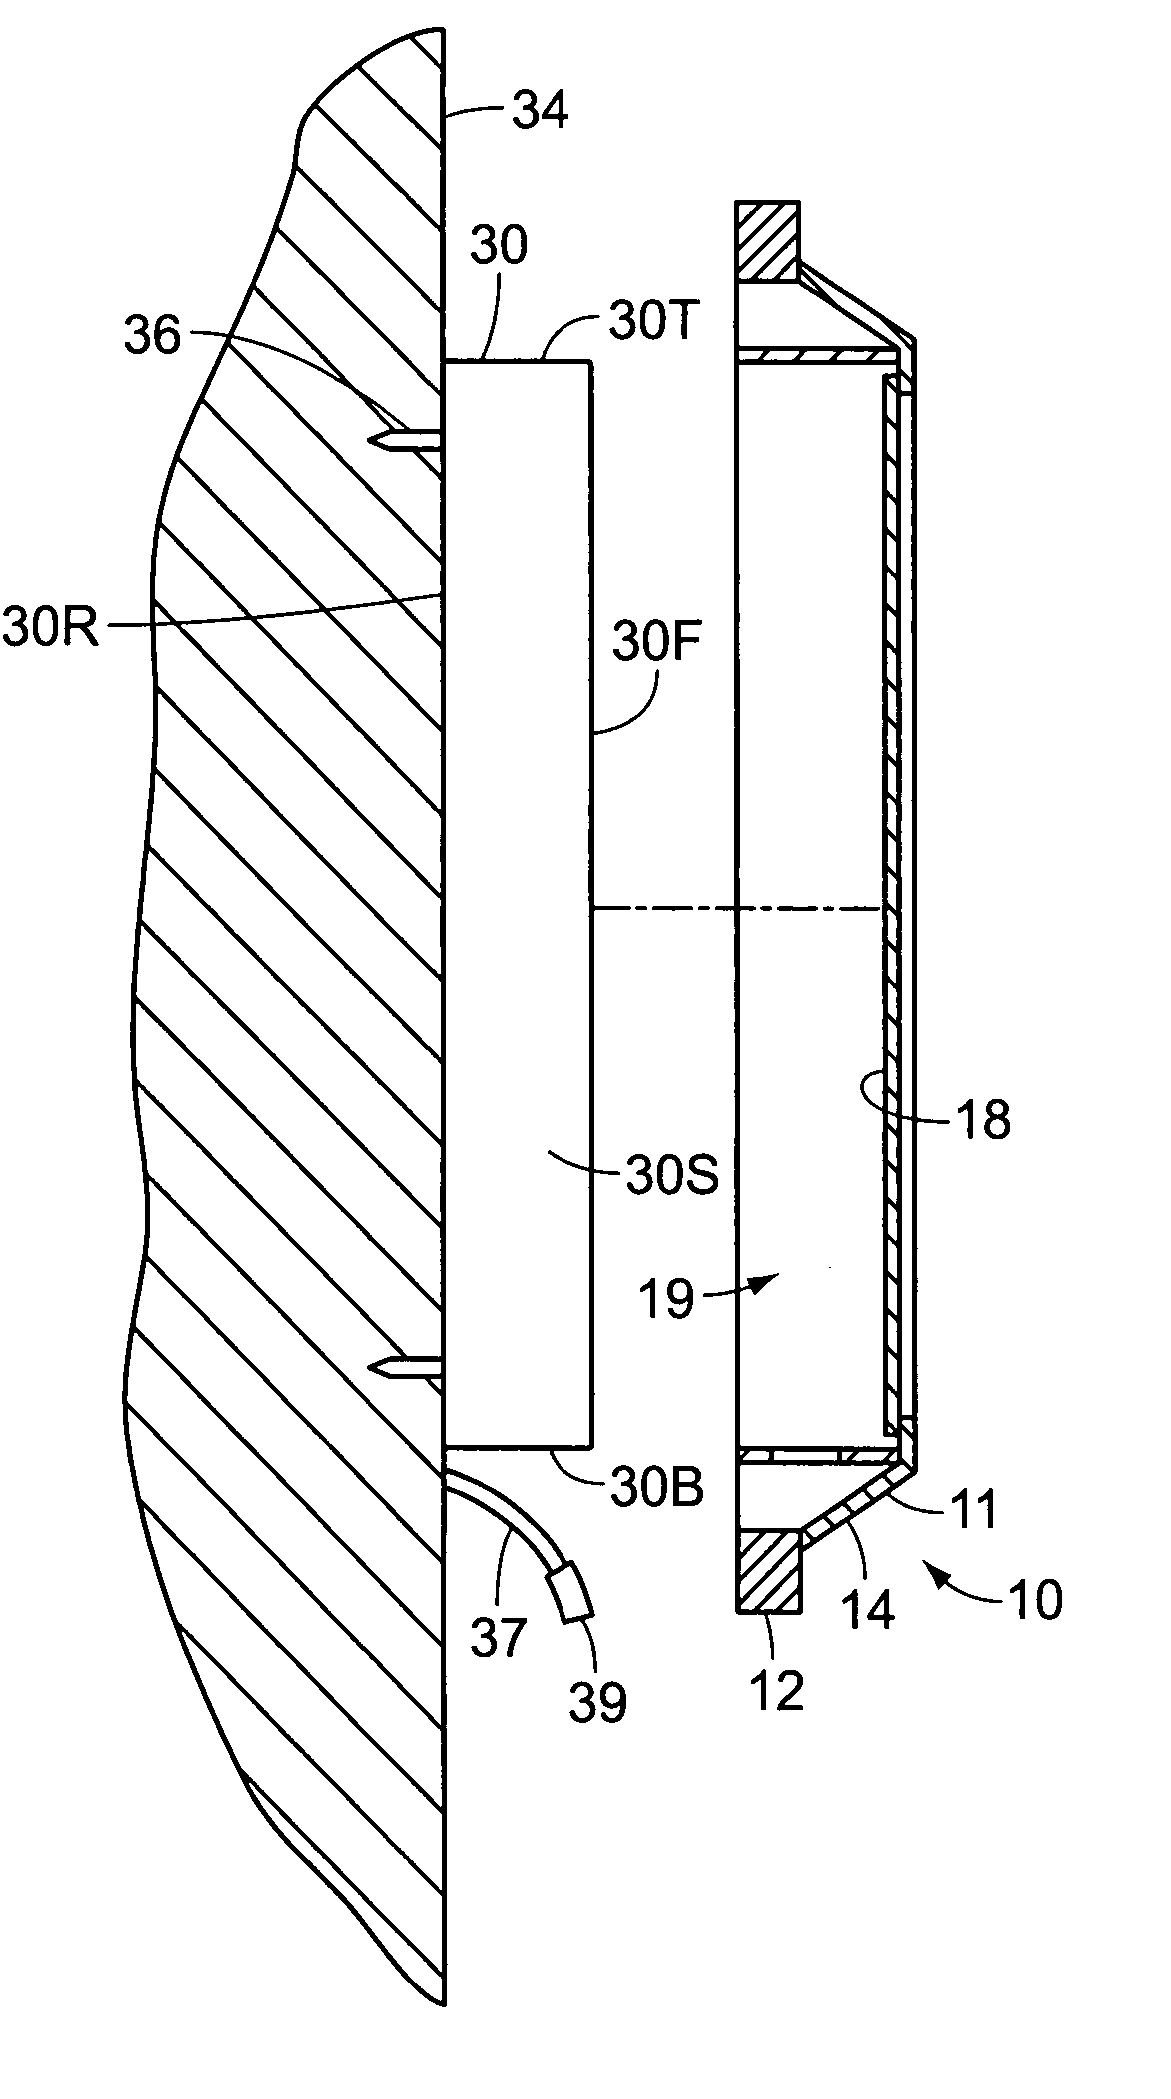 Decorative cover frame assembly for selectively concealing a flat panel or high definition television display